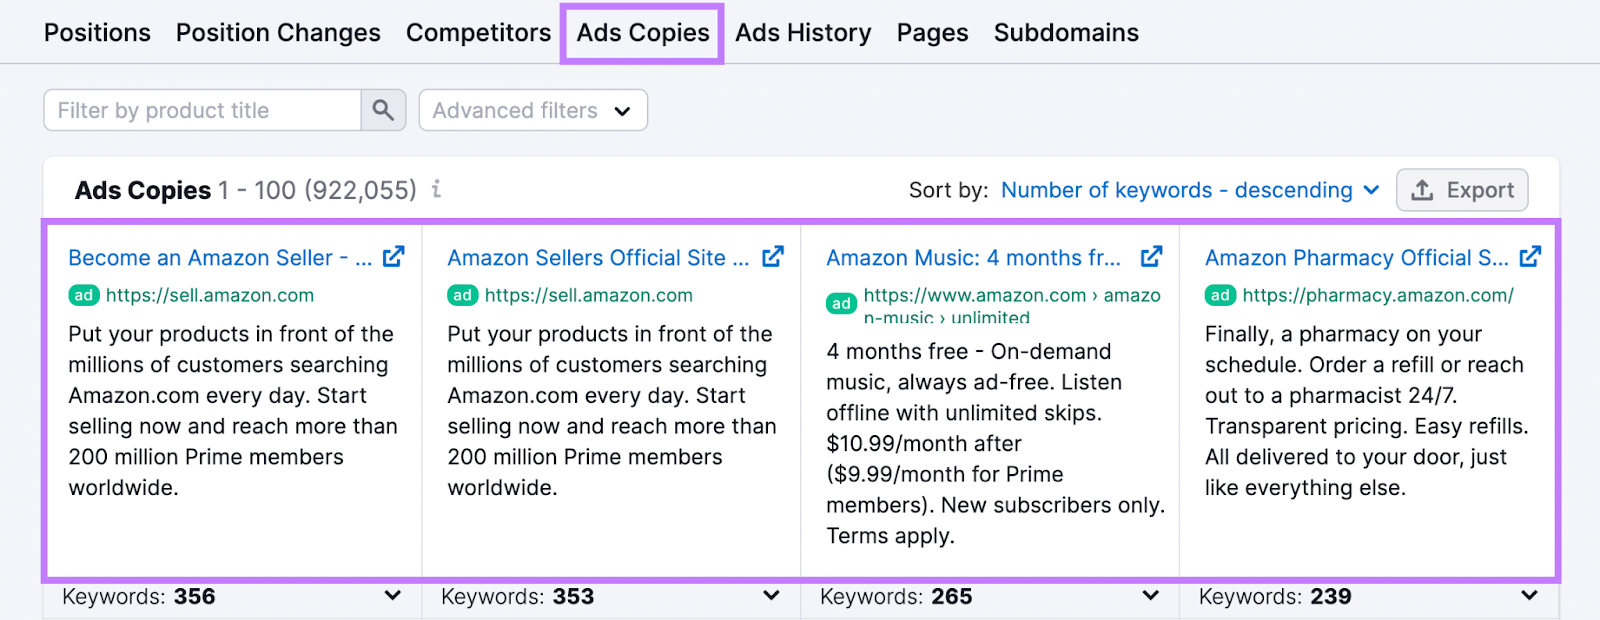 “Ads Copies” tab in Advertising Research tool